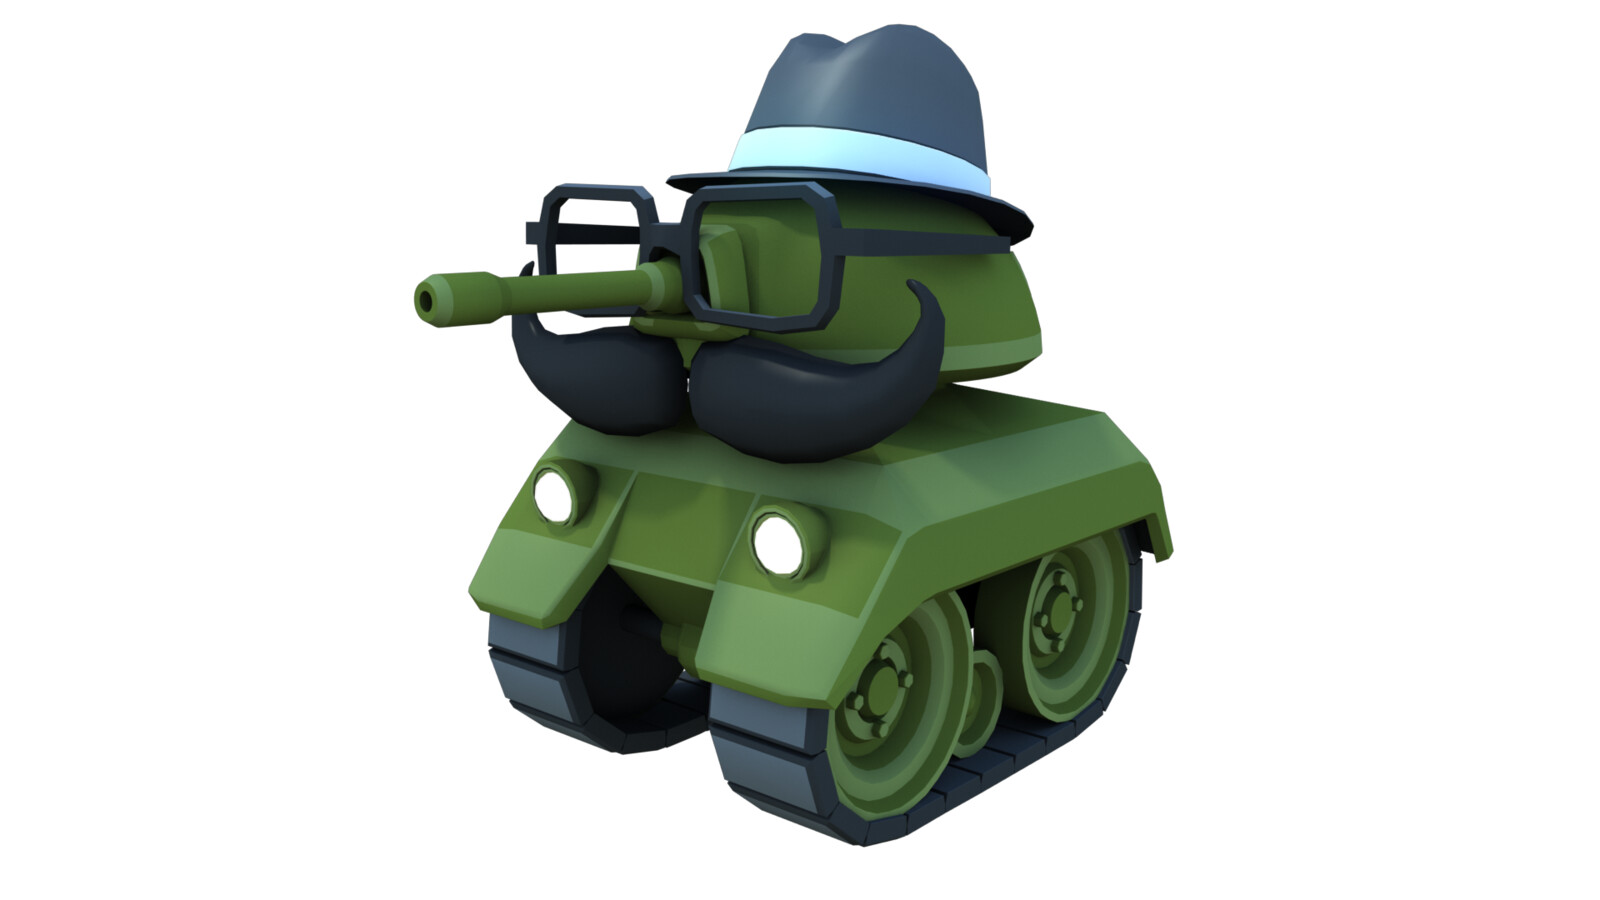 The "dome" tank modeling the "Hipster Asset Pack". Modeling a mustache for a tank is one of the more unusual things I've done professionally.

Mesh reduced using Modo
Texture created in Substance Designer
UVed (and textured) in Modo
Rendered in Modo